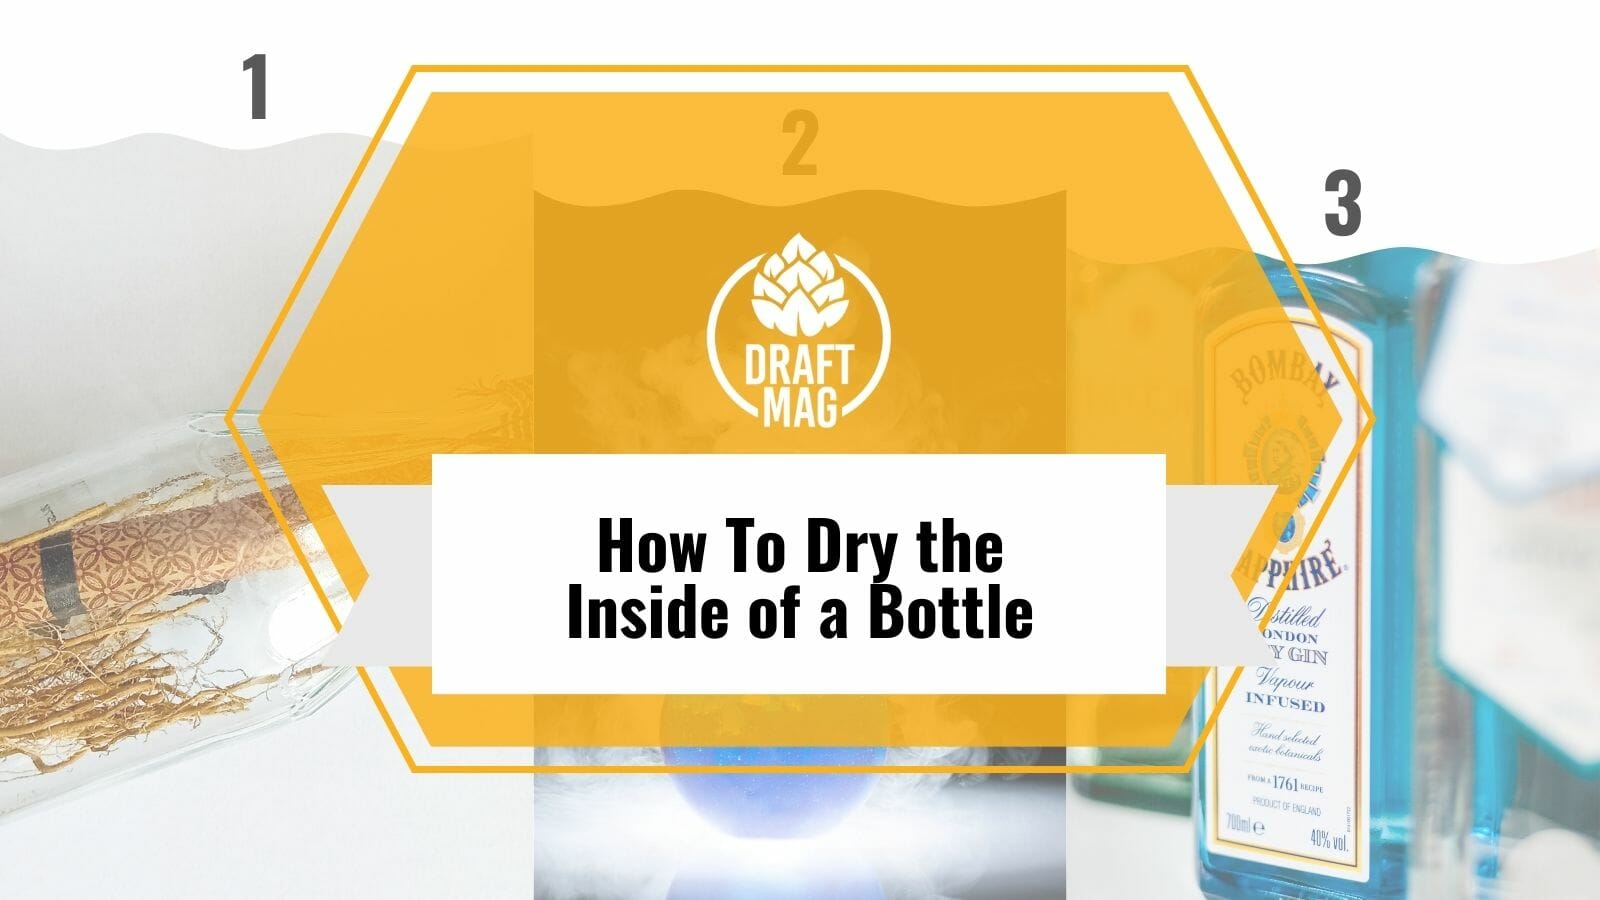 How To Dry the Inside of a Bottle